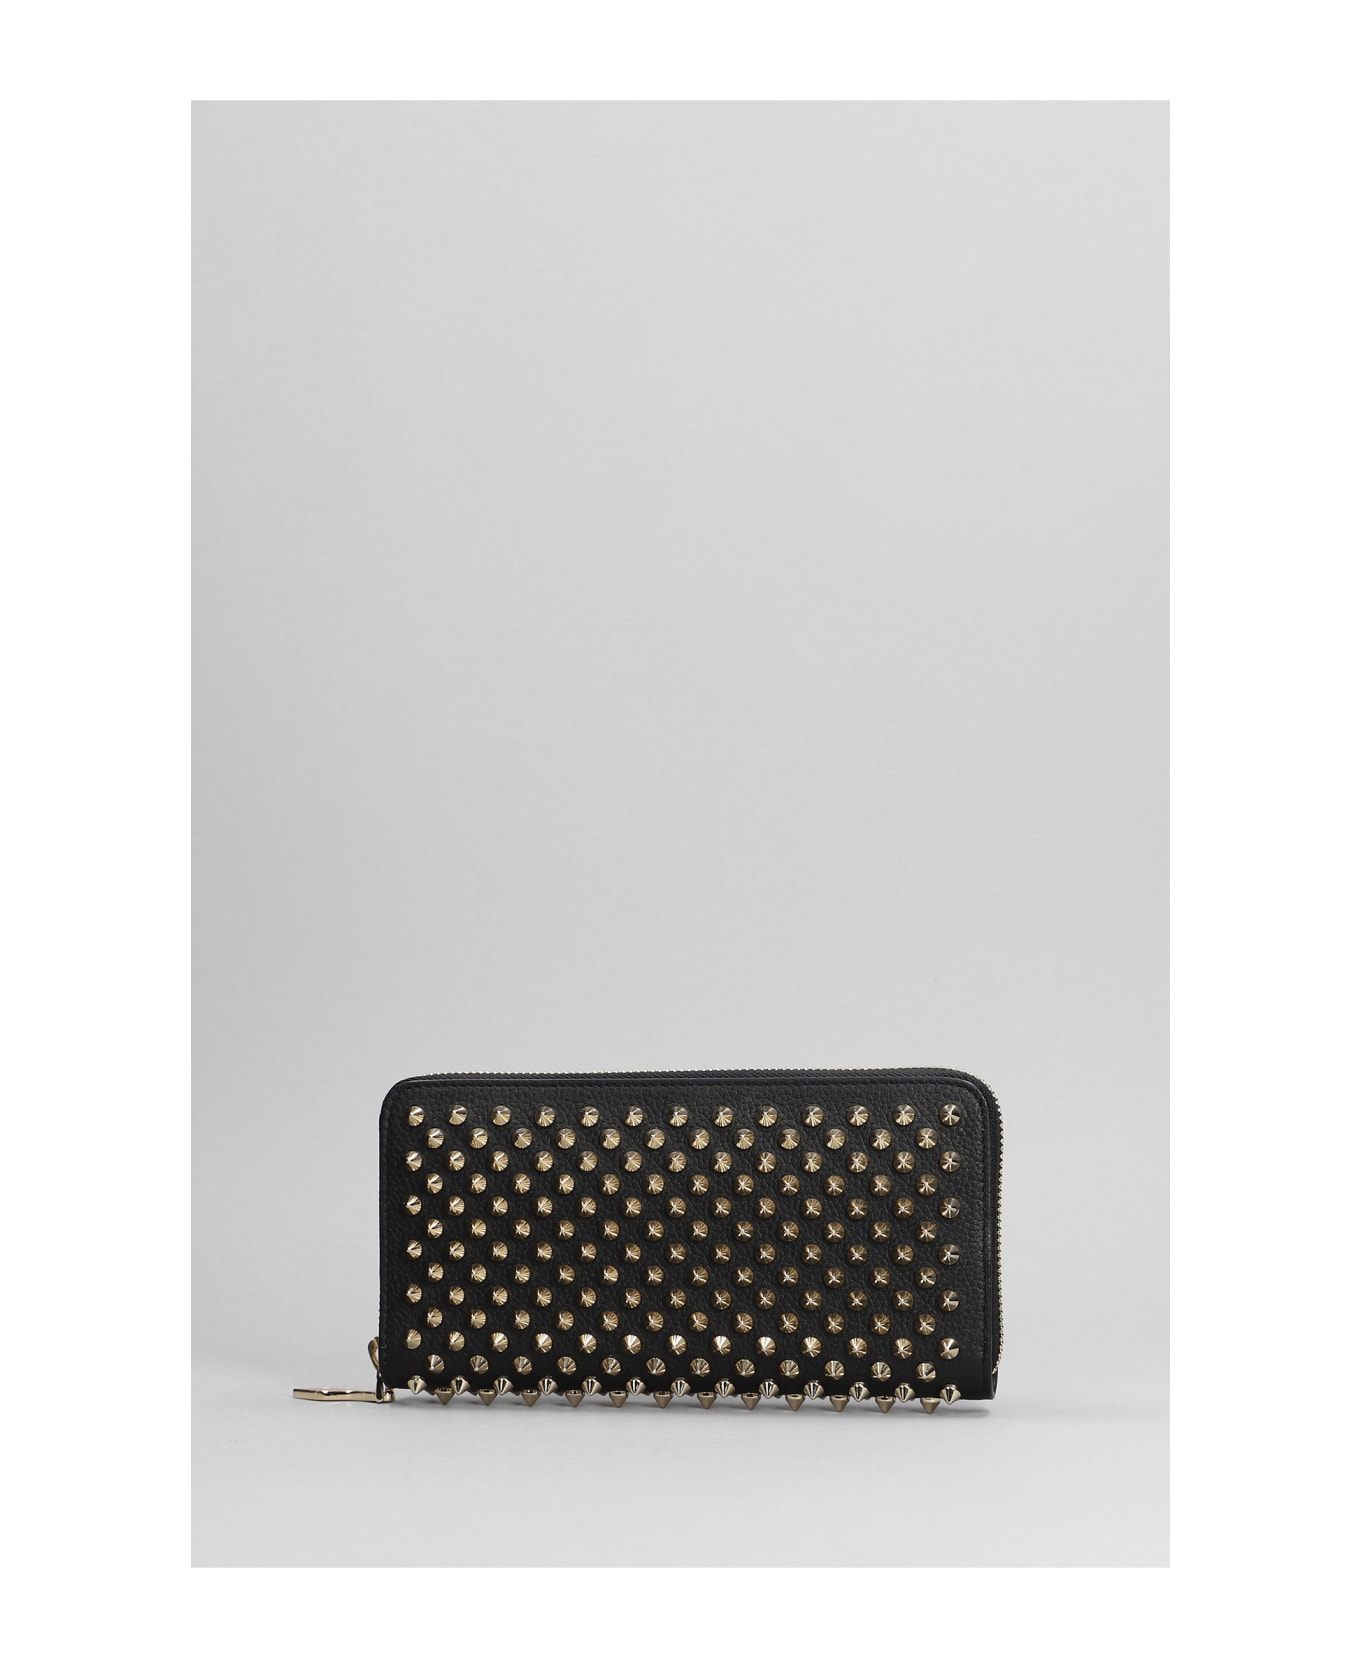 Christian Louboutin Panettone Wallet In Black Leather - Black